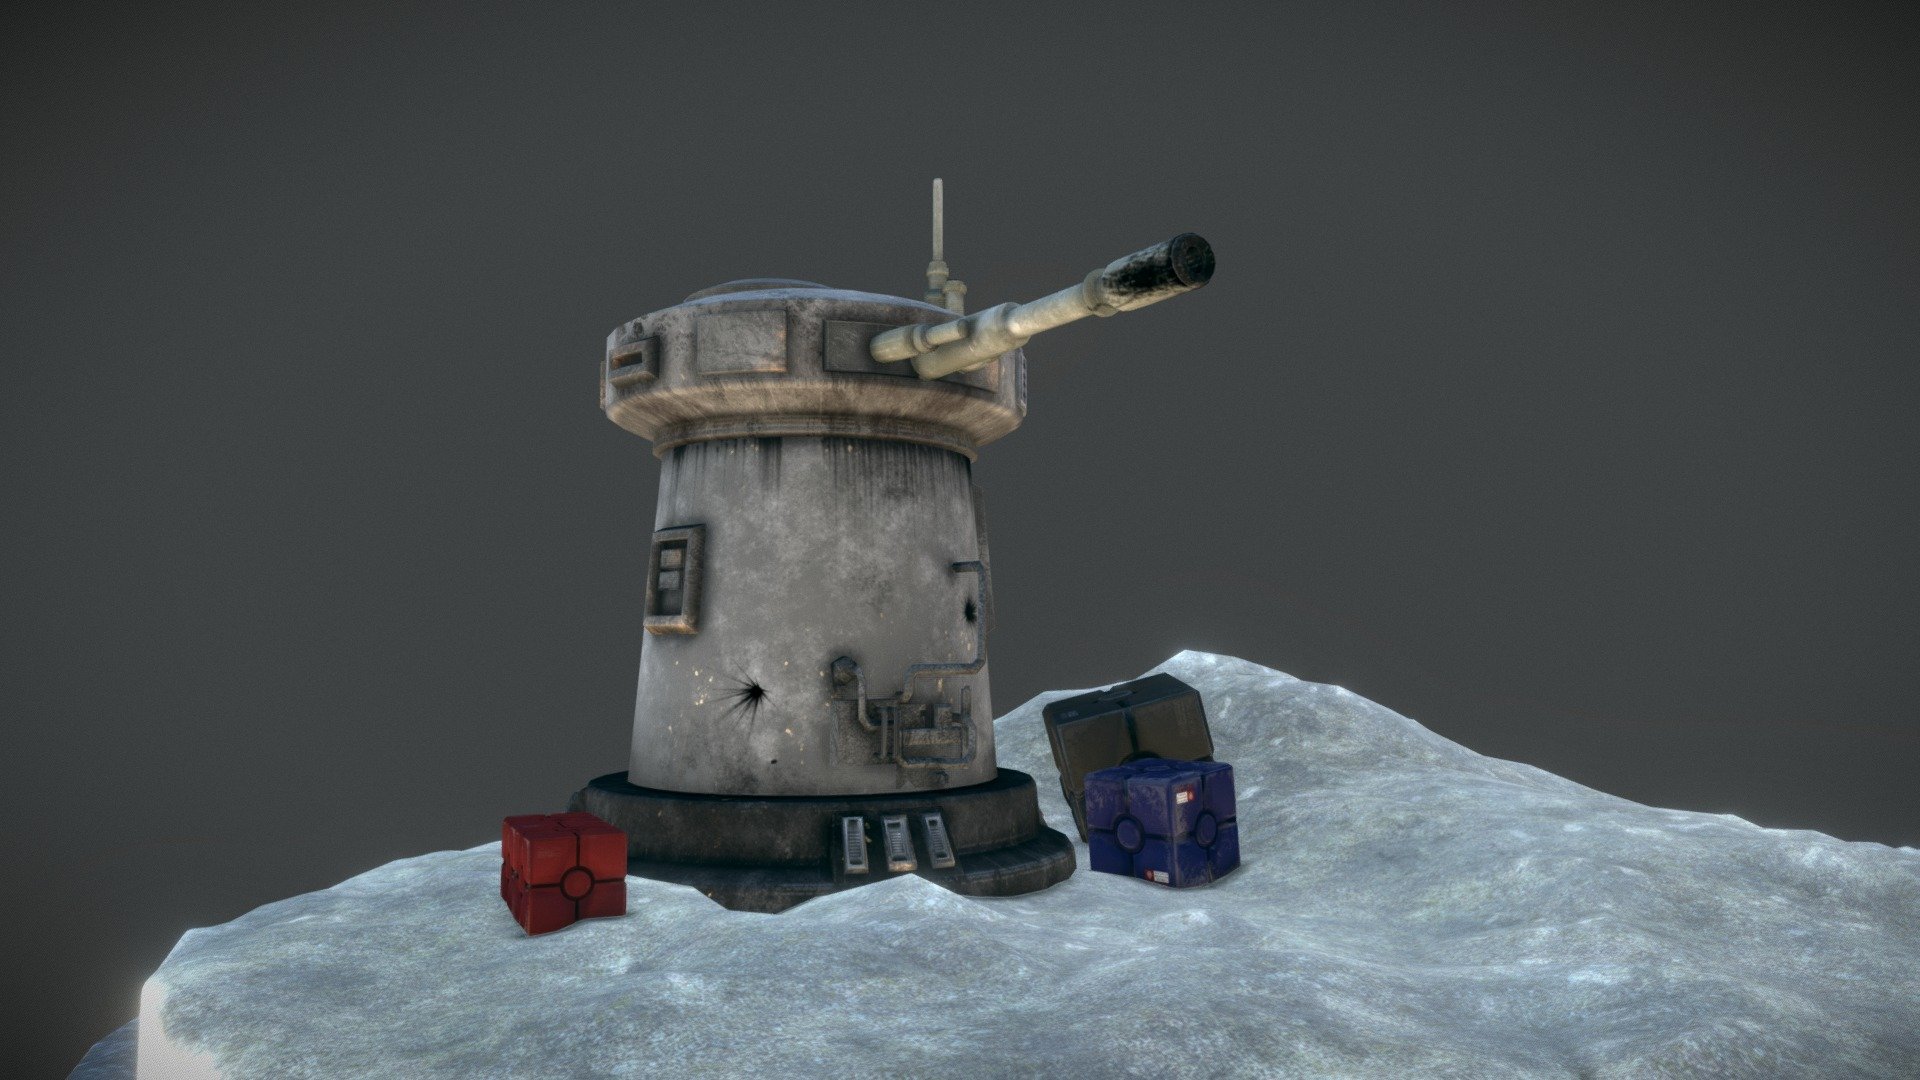 The Battle of Hoth is my favorite scene and video game level from any Star Wars moment. This Laser Turret is based off of the DF.9 TURRET from the film The Empire Strikes Back but I wanted to put my own spin on it by adding more pieces and greebles 3d model